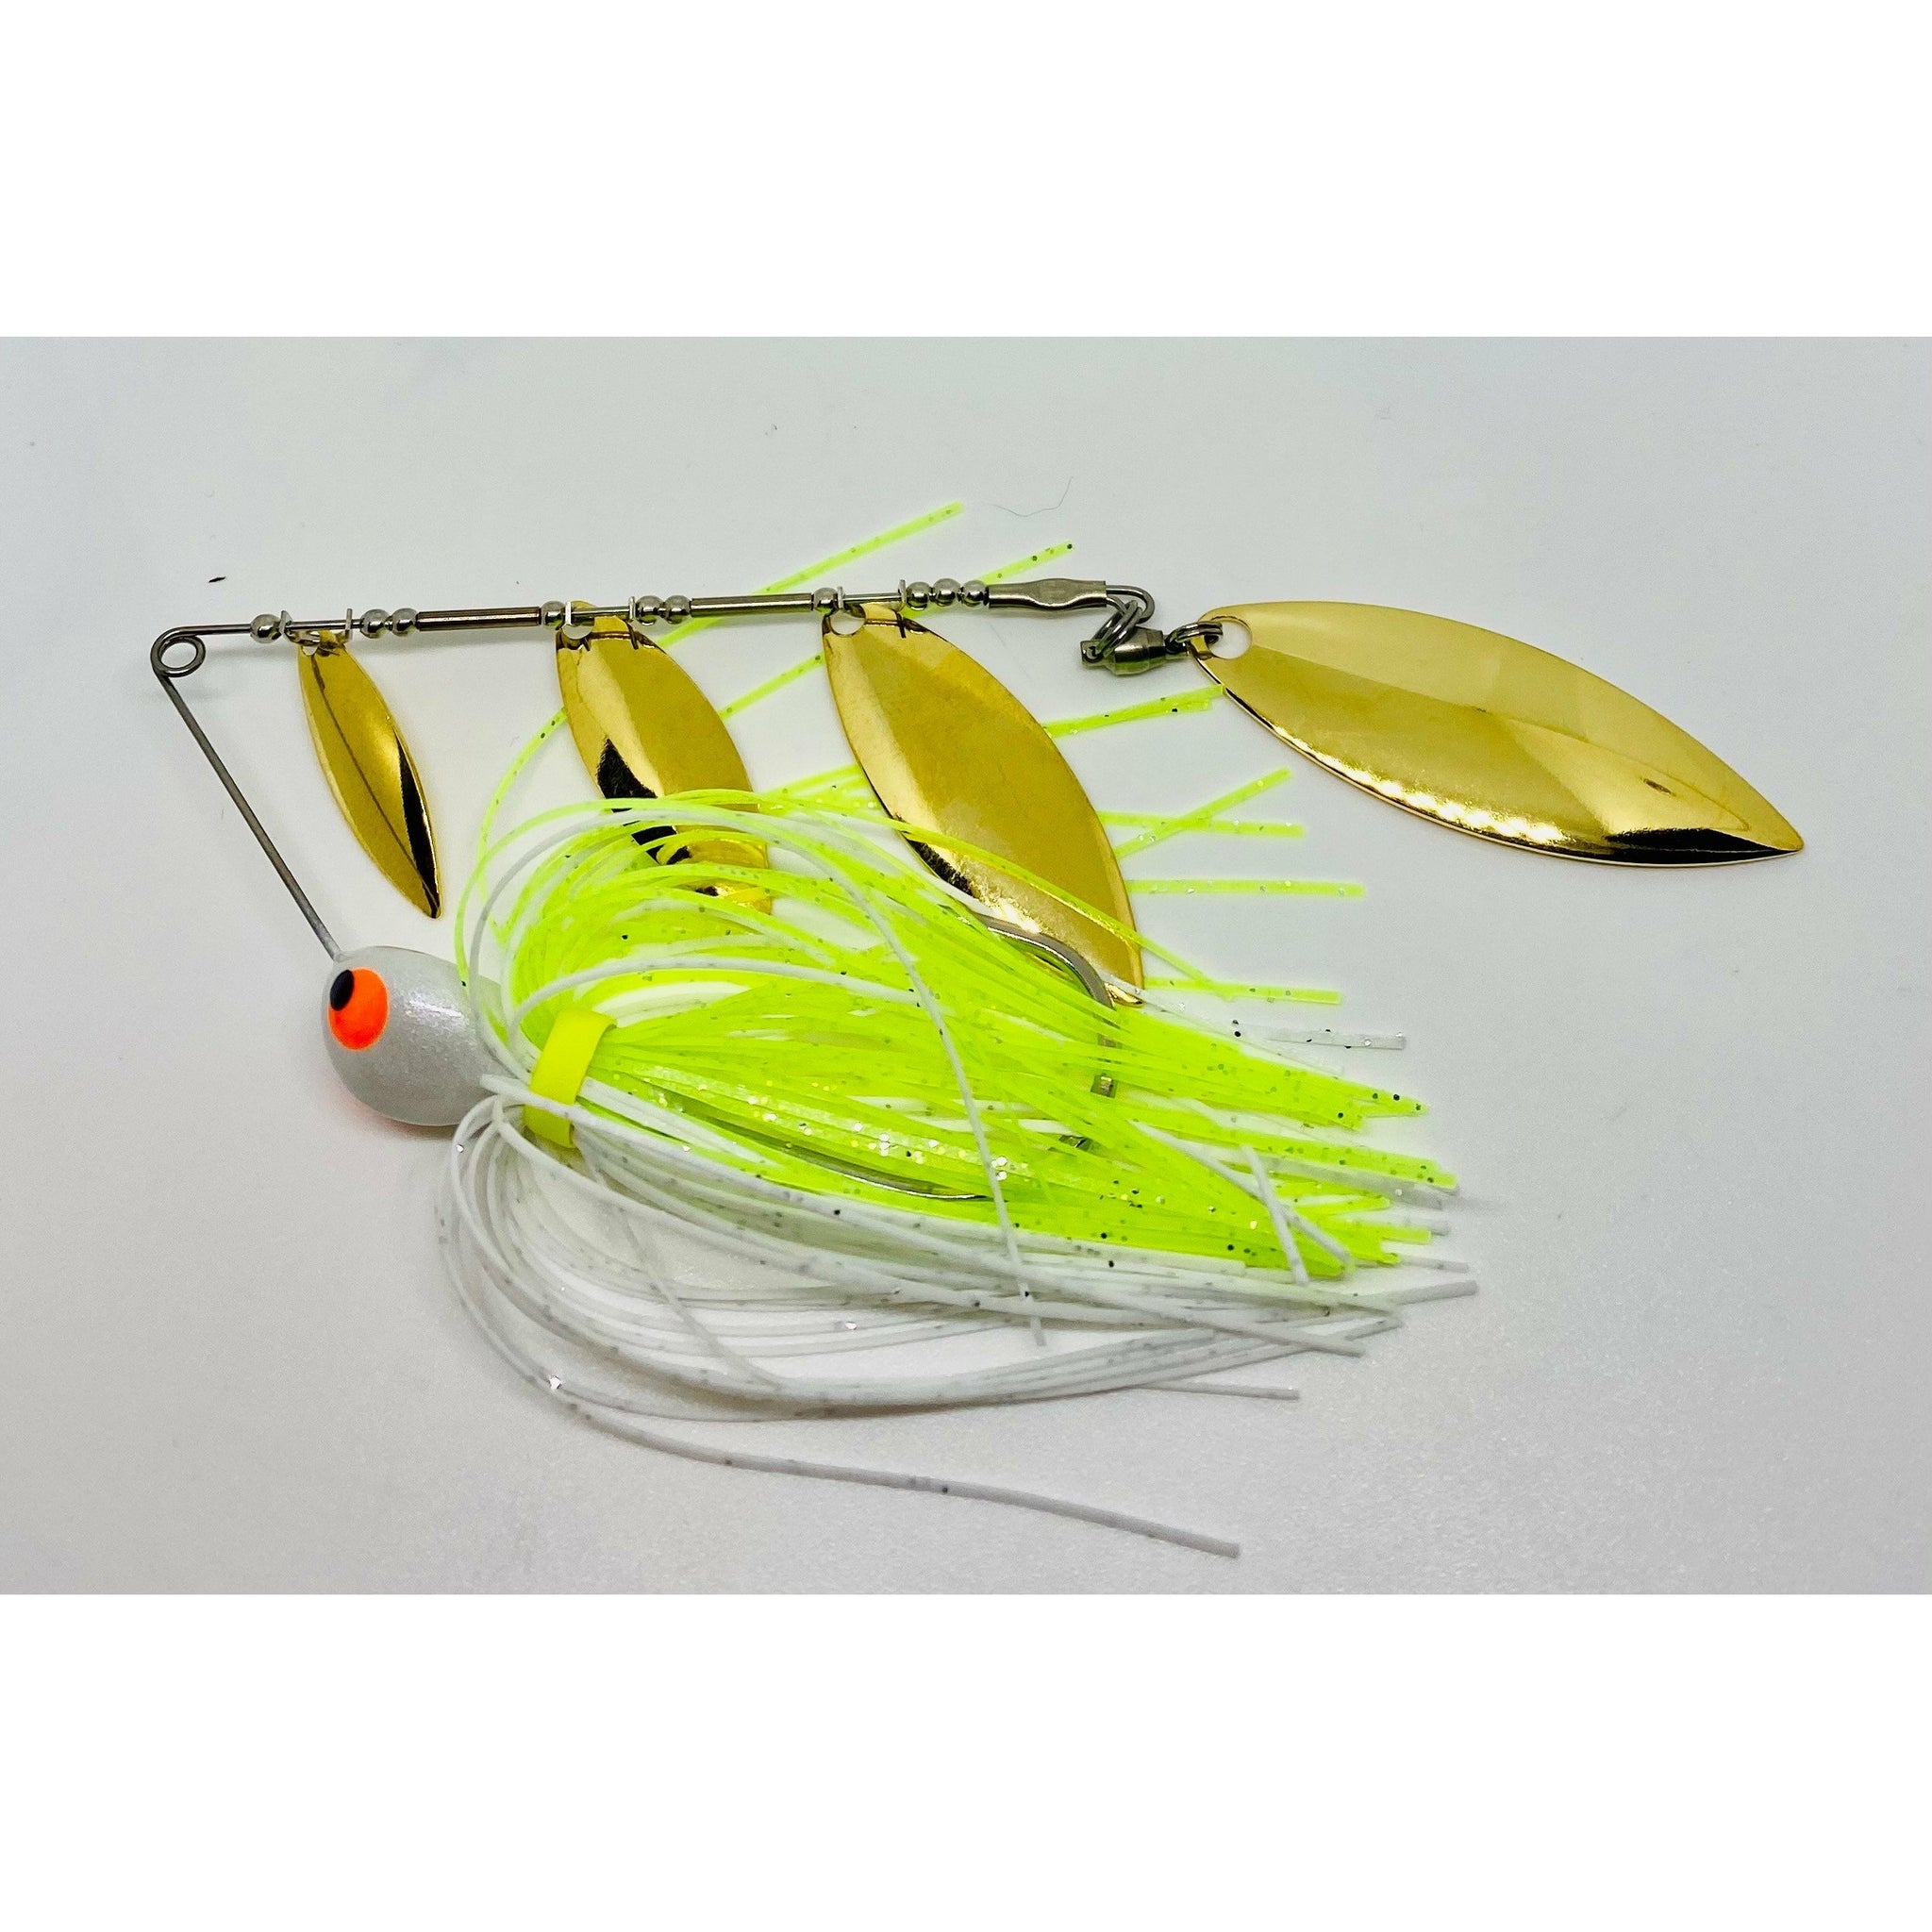 3 count Lot Brand new Wahoo 1/4 ounce Spinnerbaits - Chartreuse